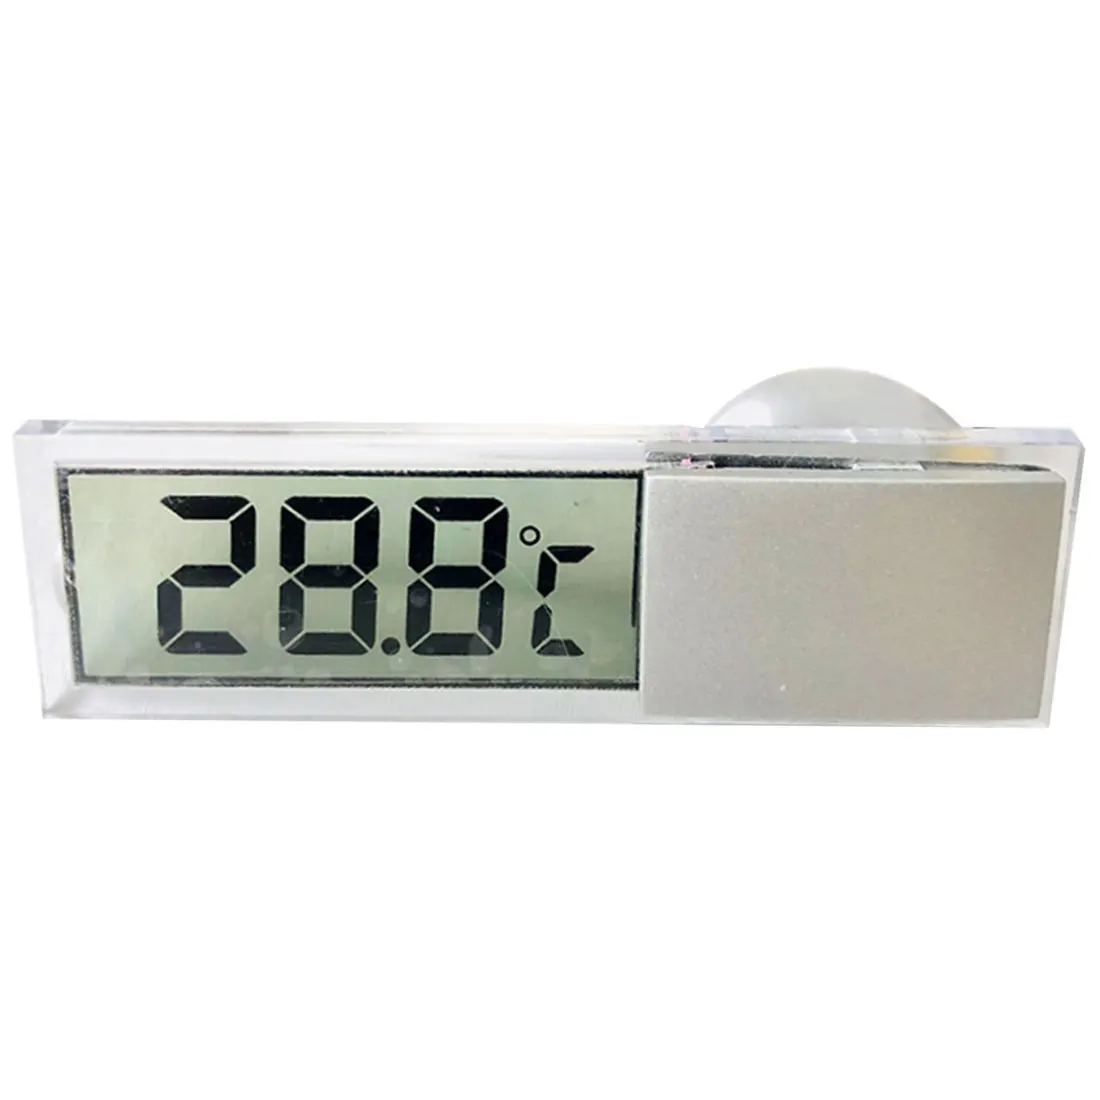 20-110C Weather Station LCD Digital Car Thermometer Thermostat Timer Clock Temperature Instruments Sensor Wall Type Meter